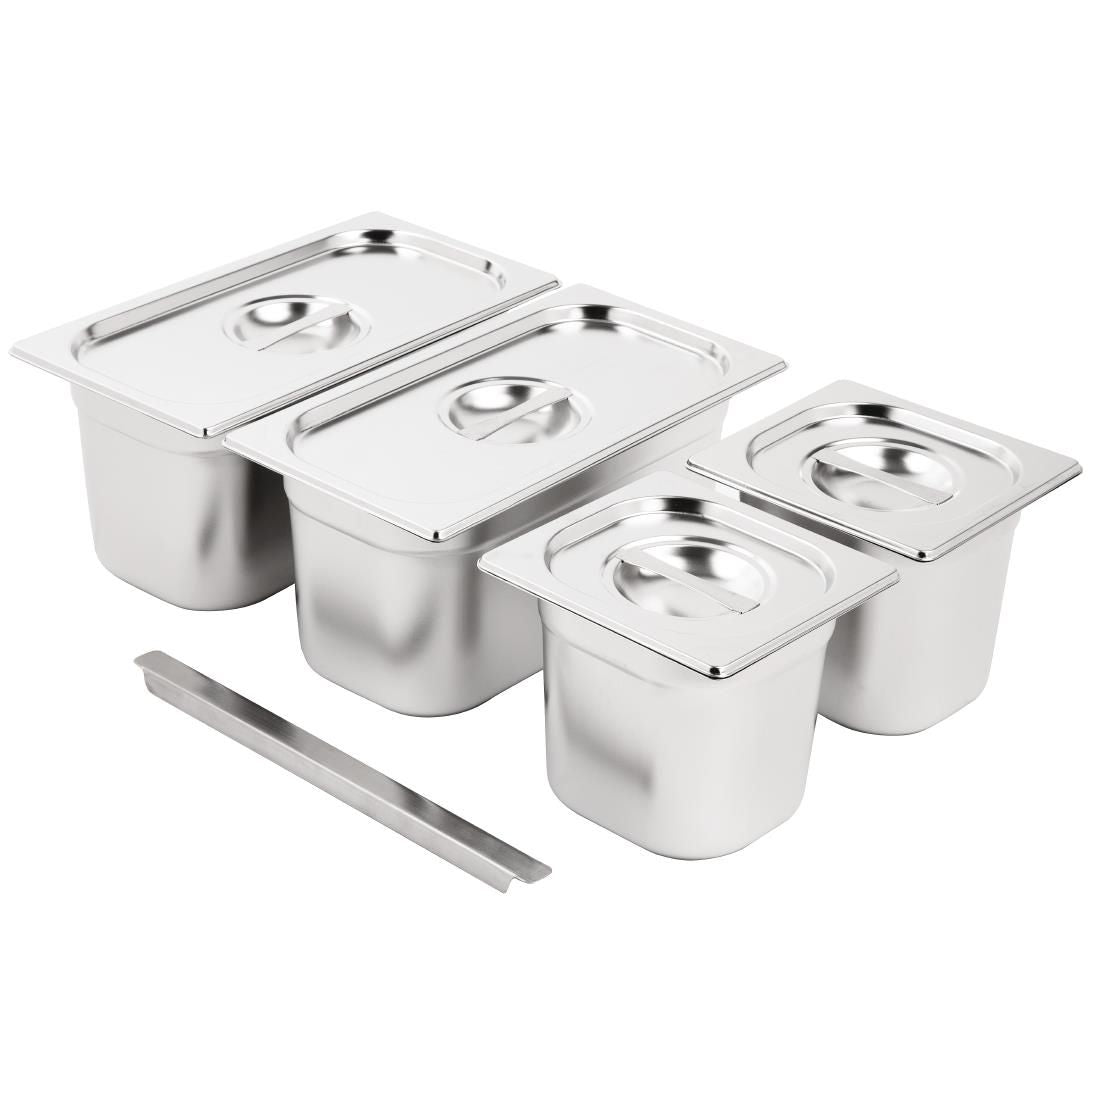 SA249 Vogue Stainless Steel Gastronorm Pan Set 2x 1/3  2 x 1/6 with Lids